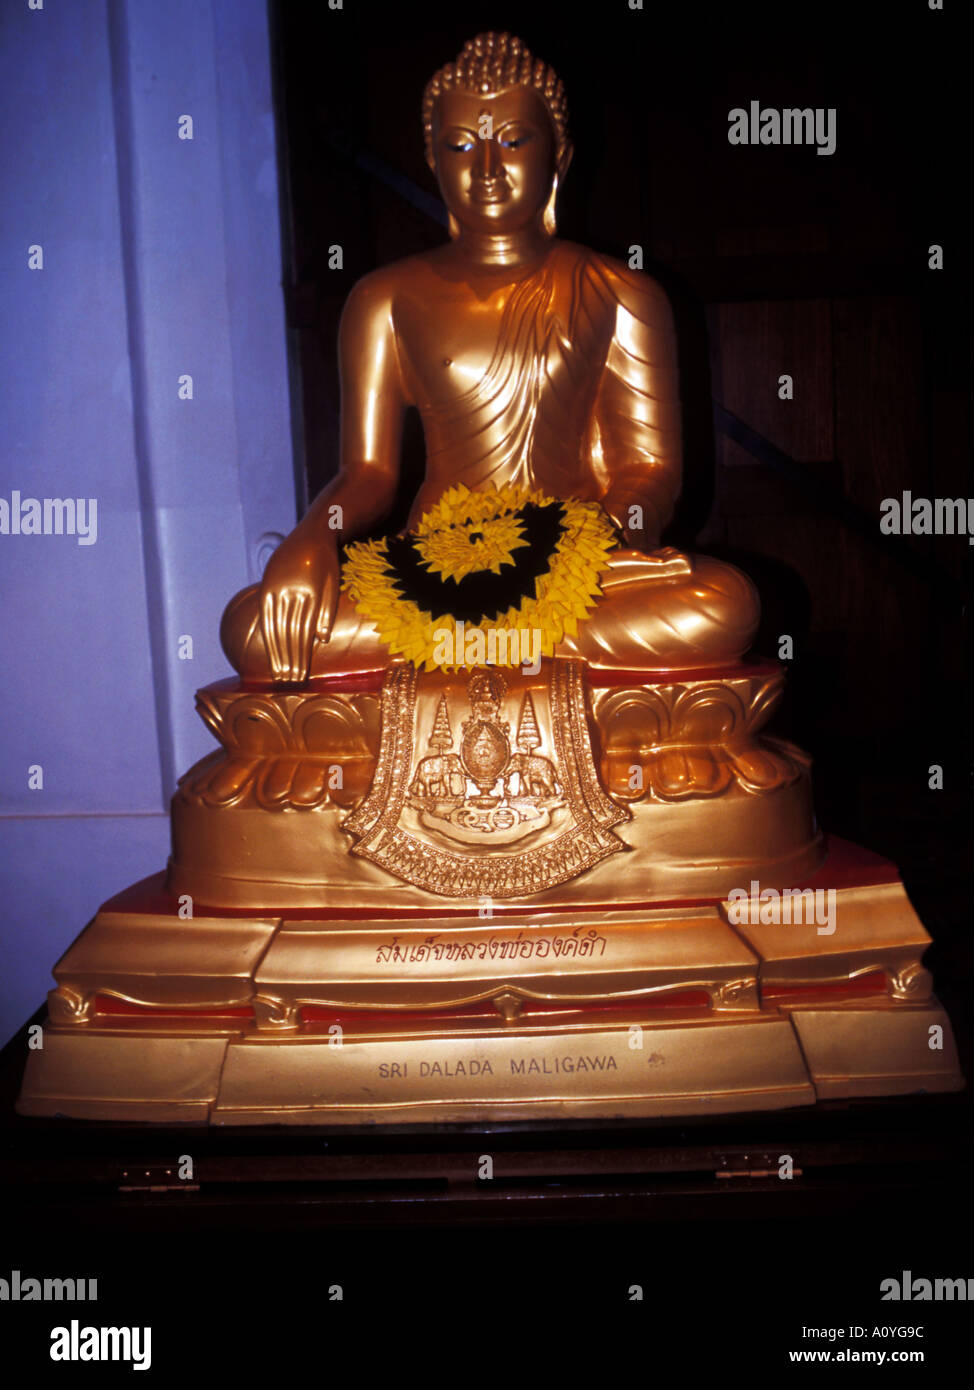 Golden Buddah statue inside the Temple of the Tooth at Kandy Sri Lanka Stock Photo